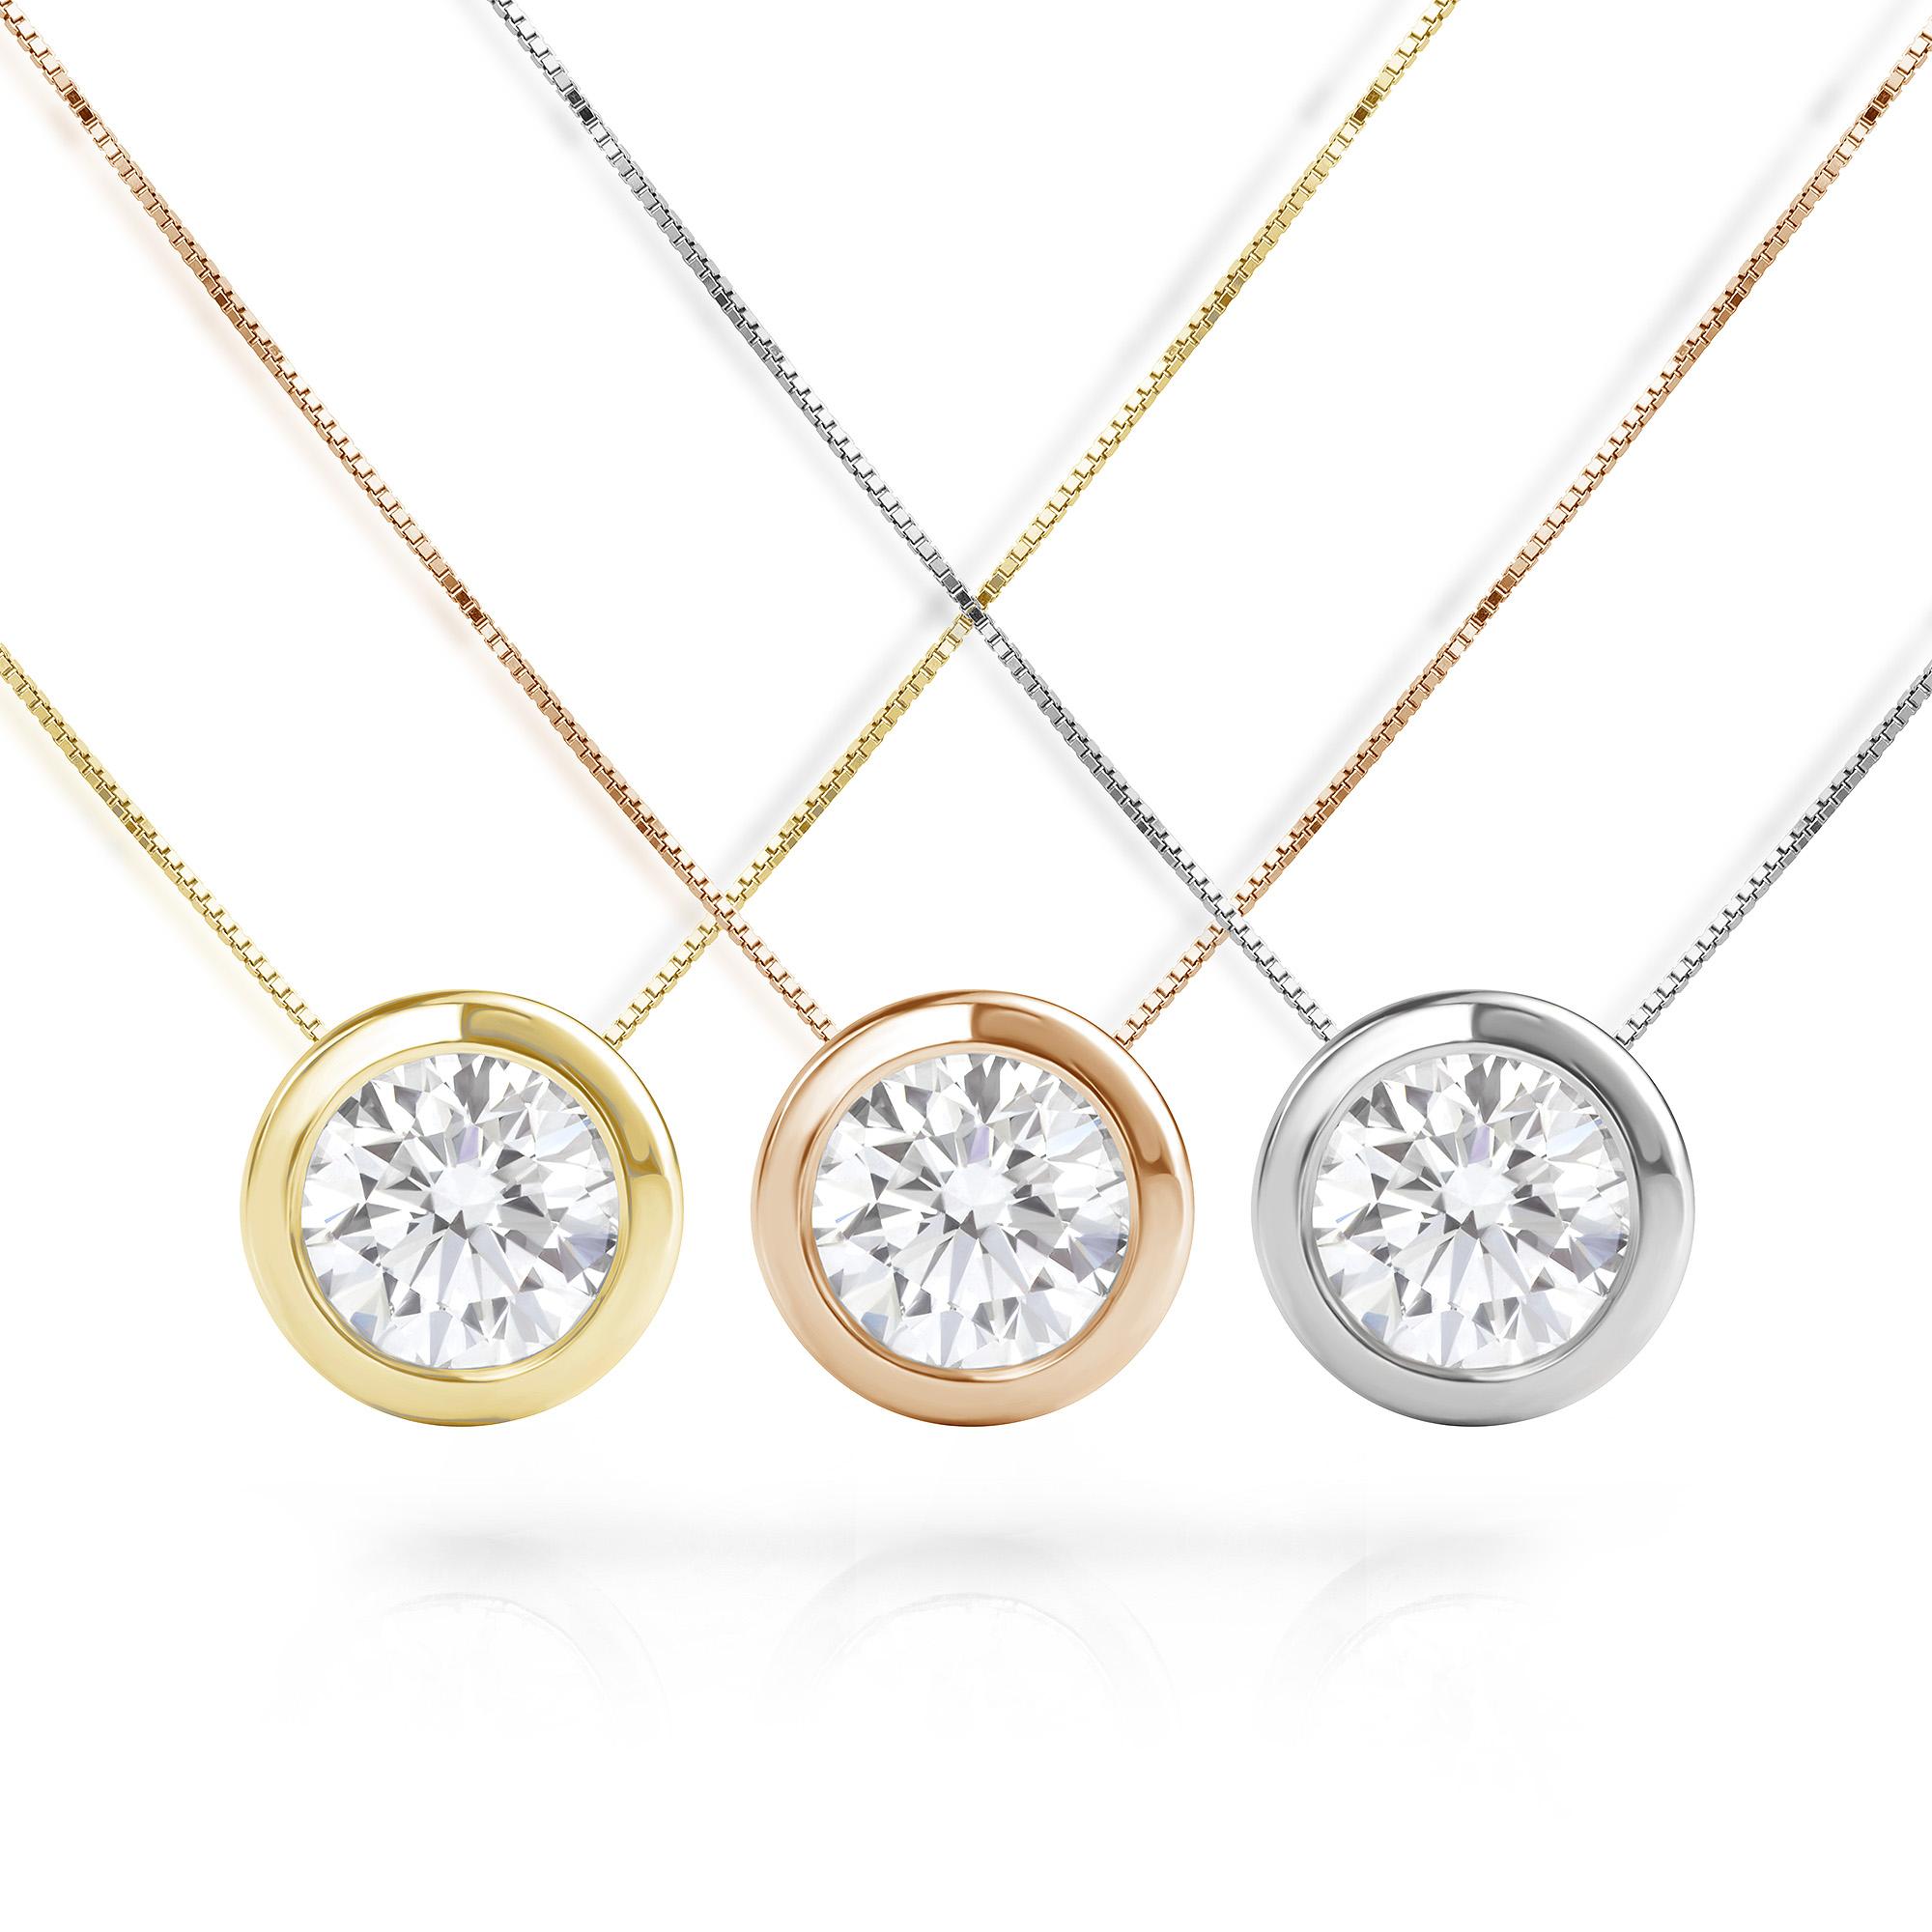 Diamond slider necklace in white, rose and yellow gold Serendipity Diamonds Ryde 01983 567283